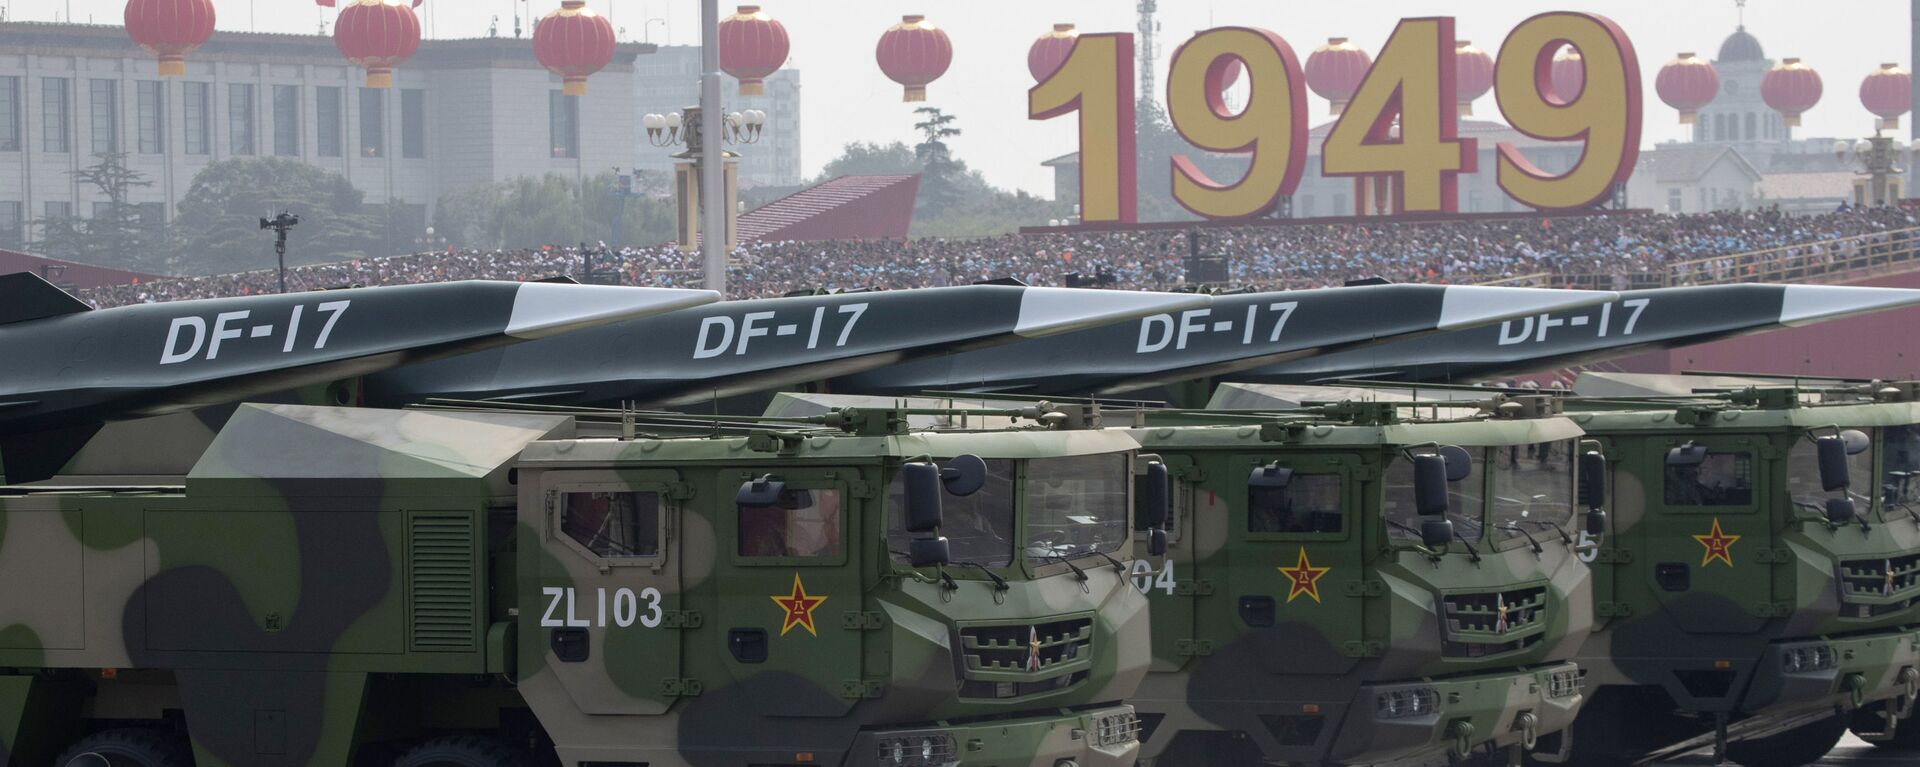 Chinese military vehicles carrying DF-17 roll during a parade to commemorate the 70th anniversary of the founding of Communist China in Beijing, Tuesday, Oct. 1, 2019.  - Sputnik International, 1920, 05.01.2021